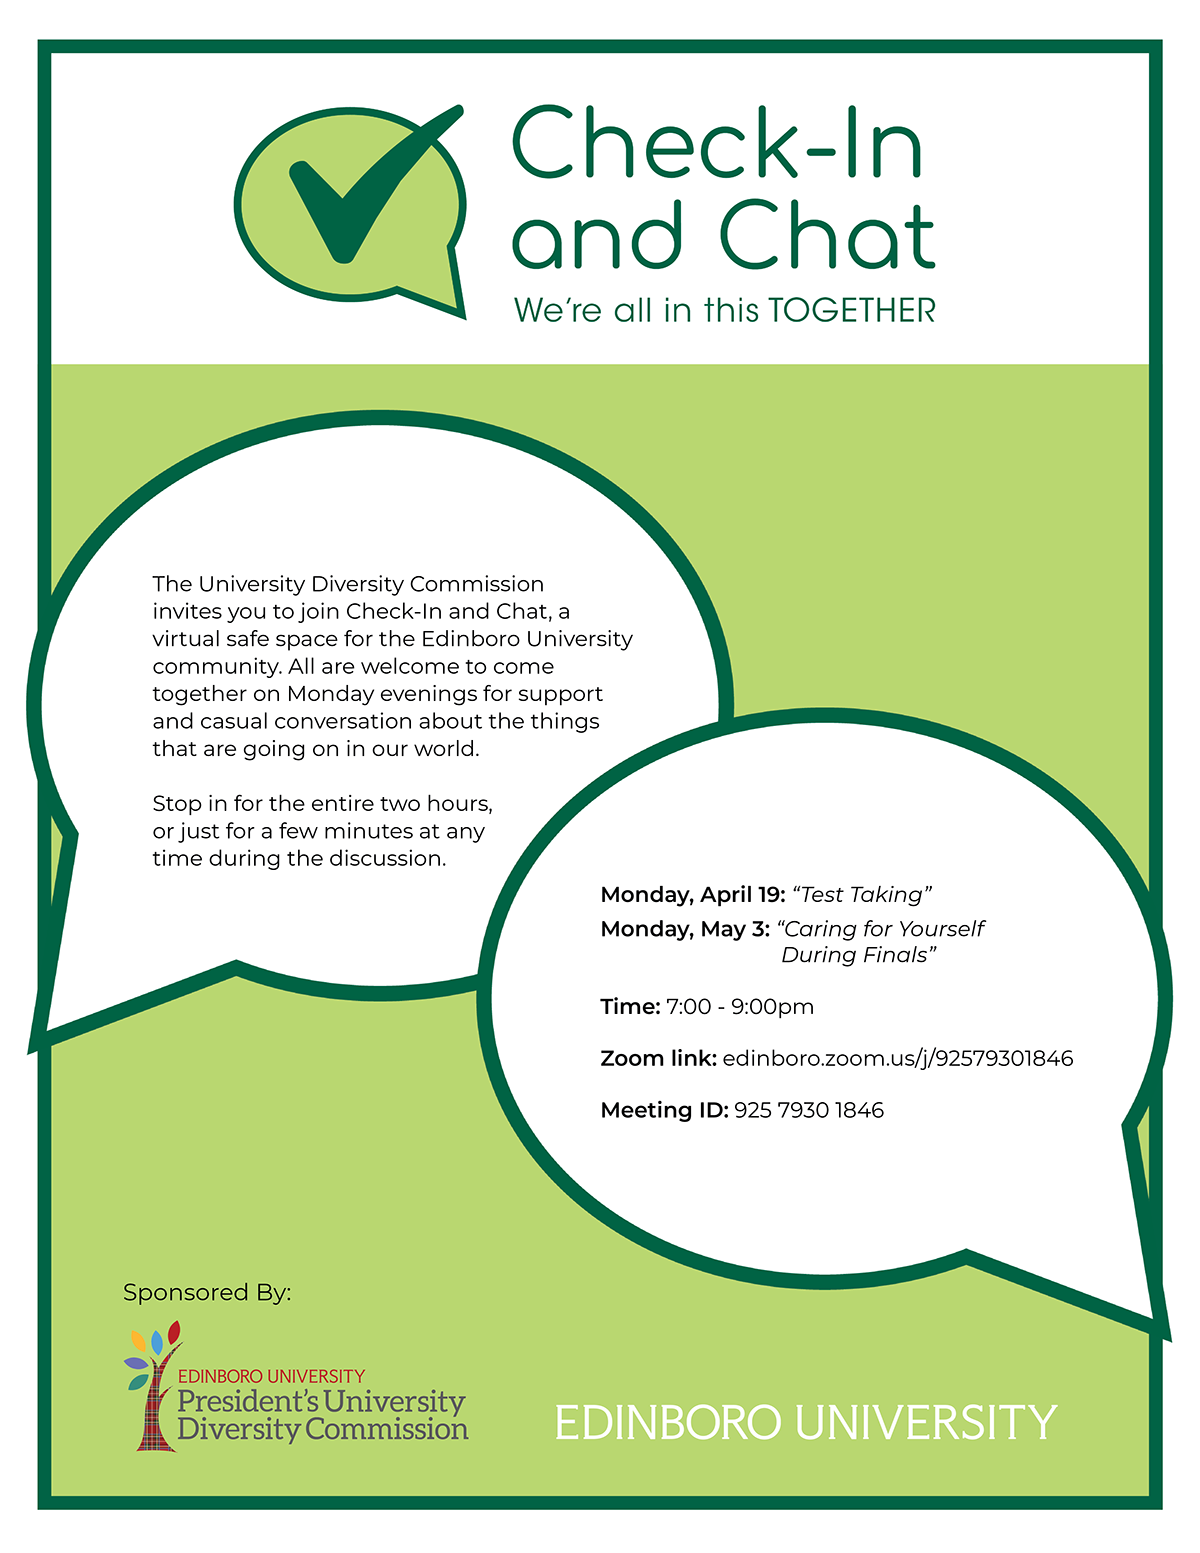 calming Chat Chat Bubble check mark check-in Edinboro University flyer green logo together